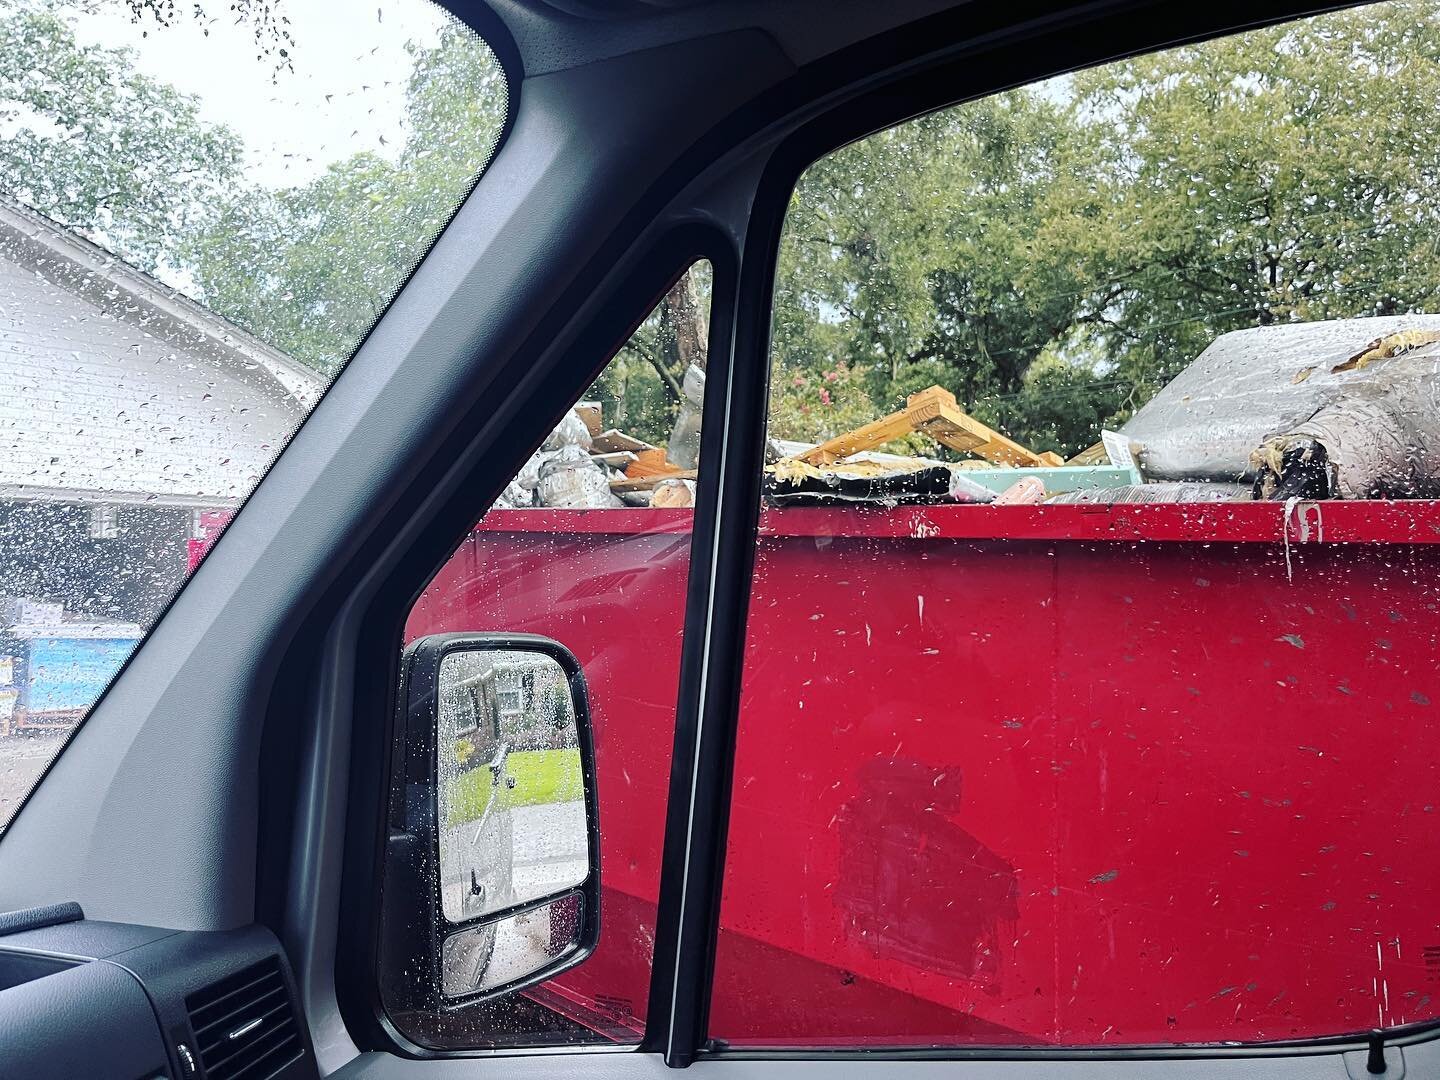 See this dumpster? It&rsquo;s from @bigredboxcoastal - perhaps the most incompetent dumpster service in #charleston. I do not enjoy shaming companies for poor performance but after showing much grace and patience, I&rsquo;ve reached my limit. 

It wa